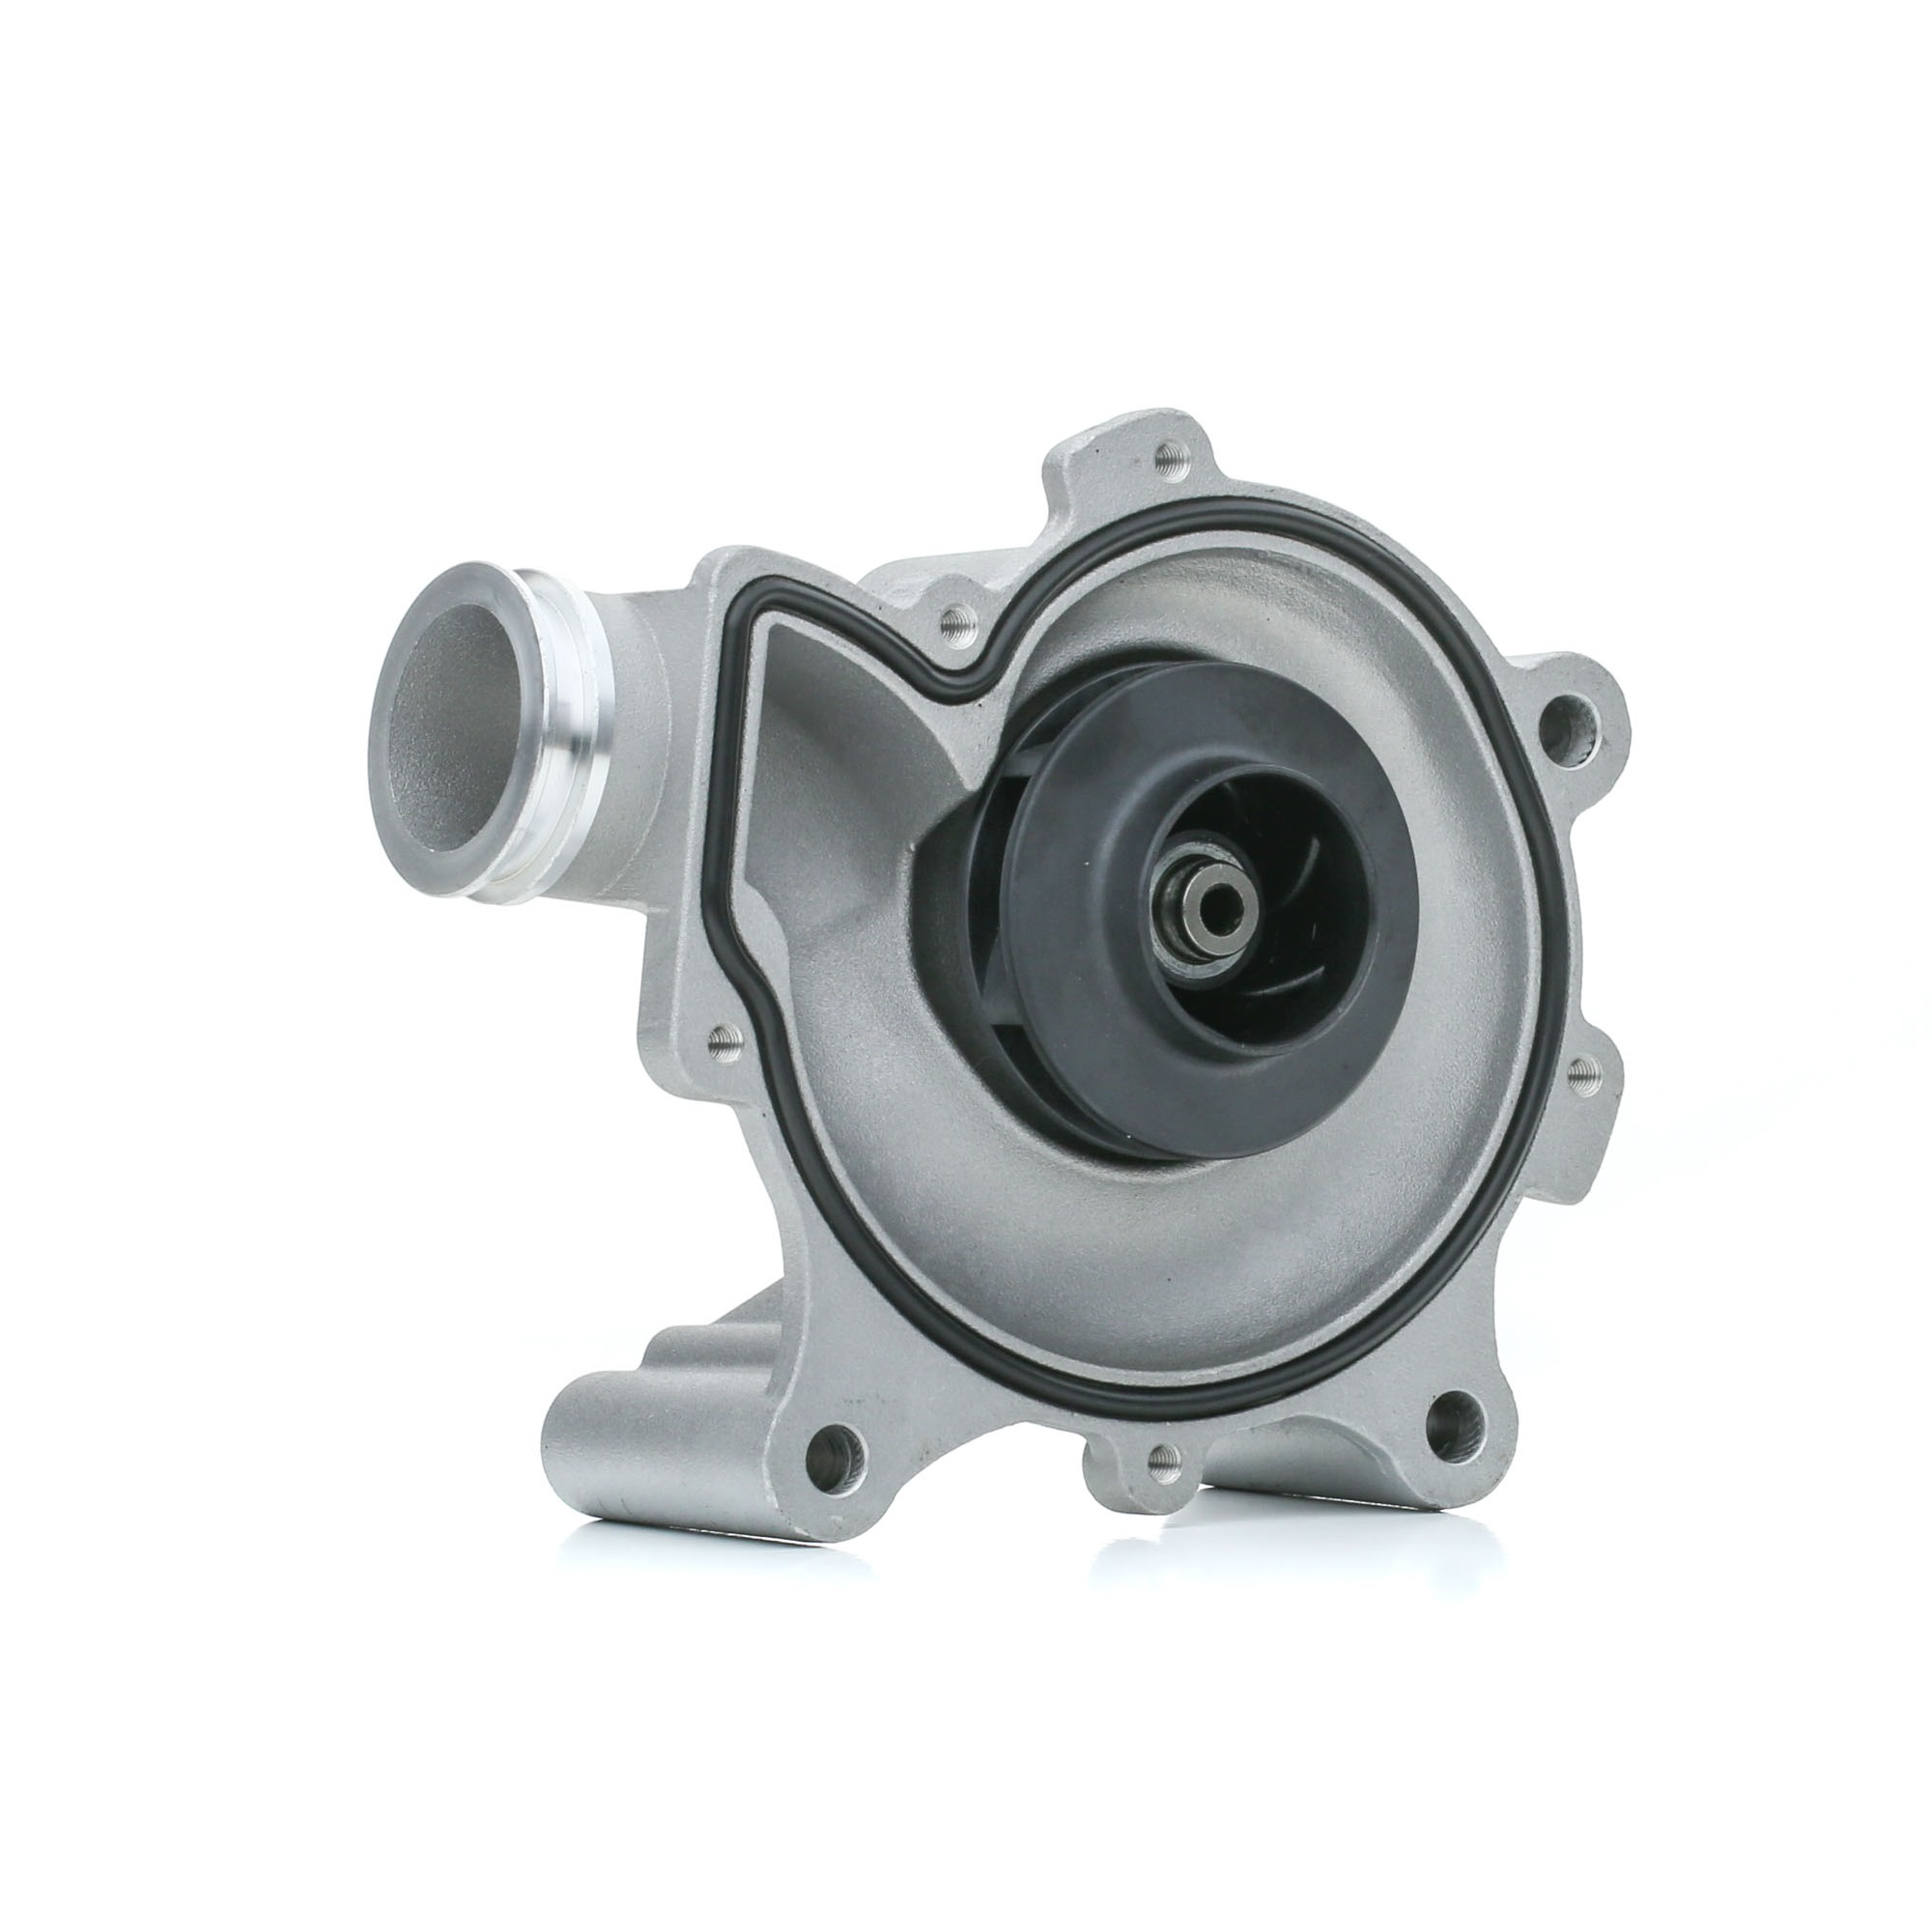 SKWP-0520461 STARK Water pumps MINI Cast Aluminium, with gaskets/seals, without lid, Mechanical, Plastic, without housing